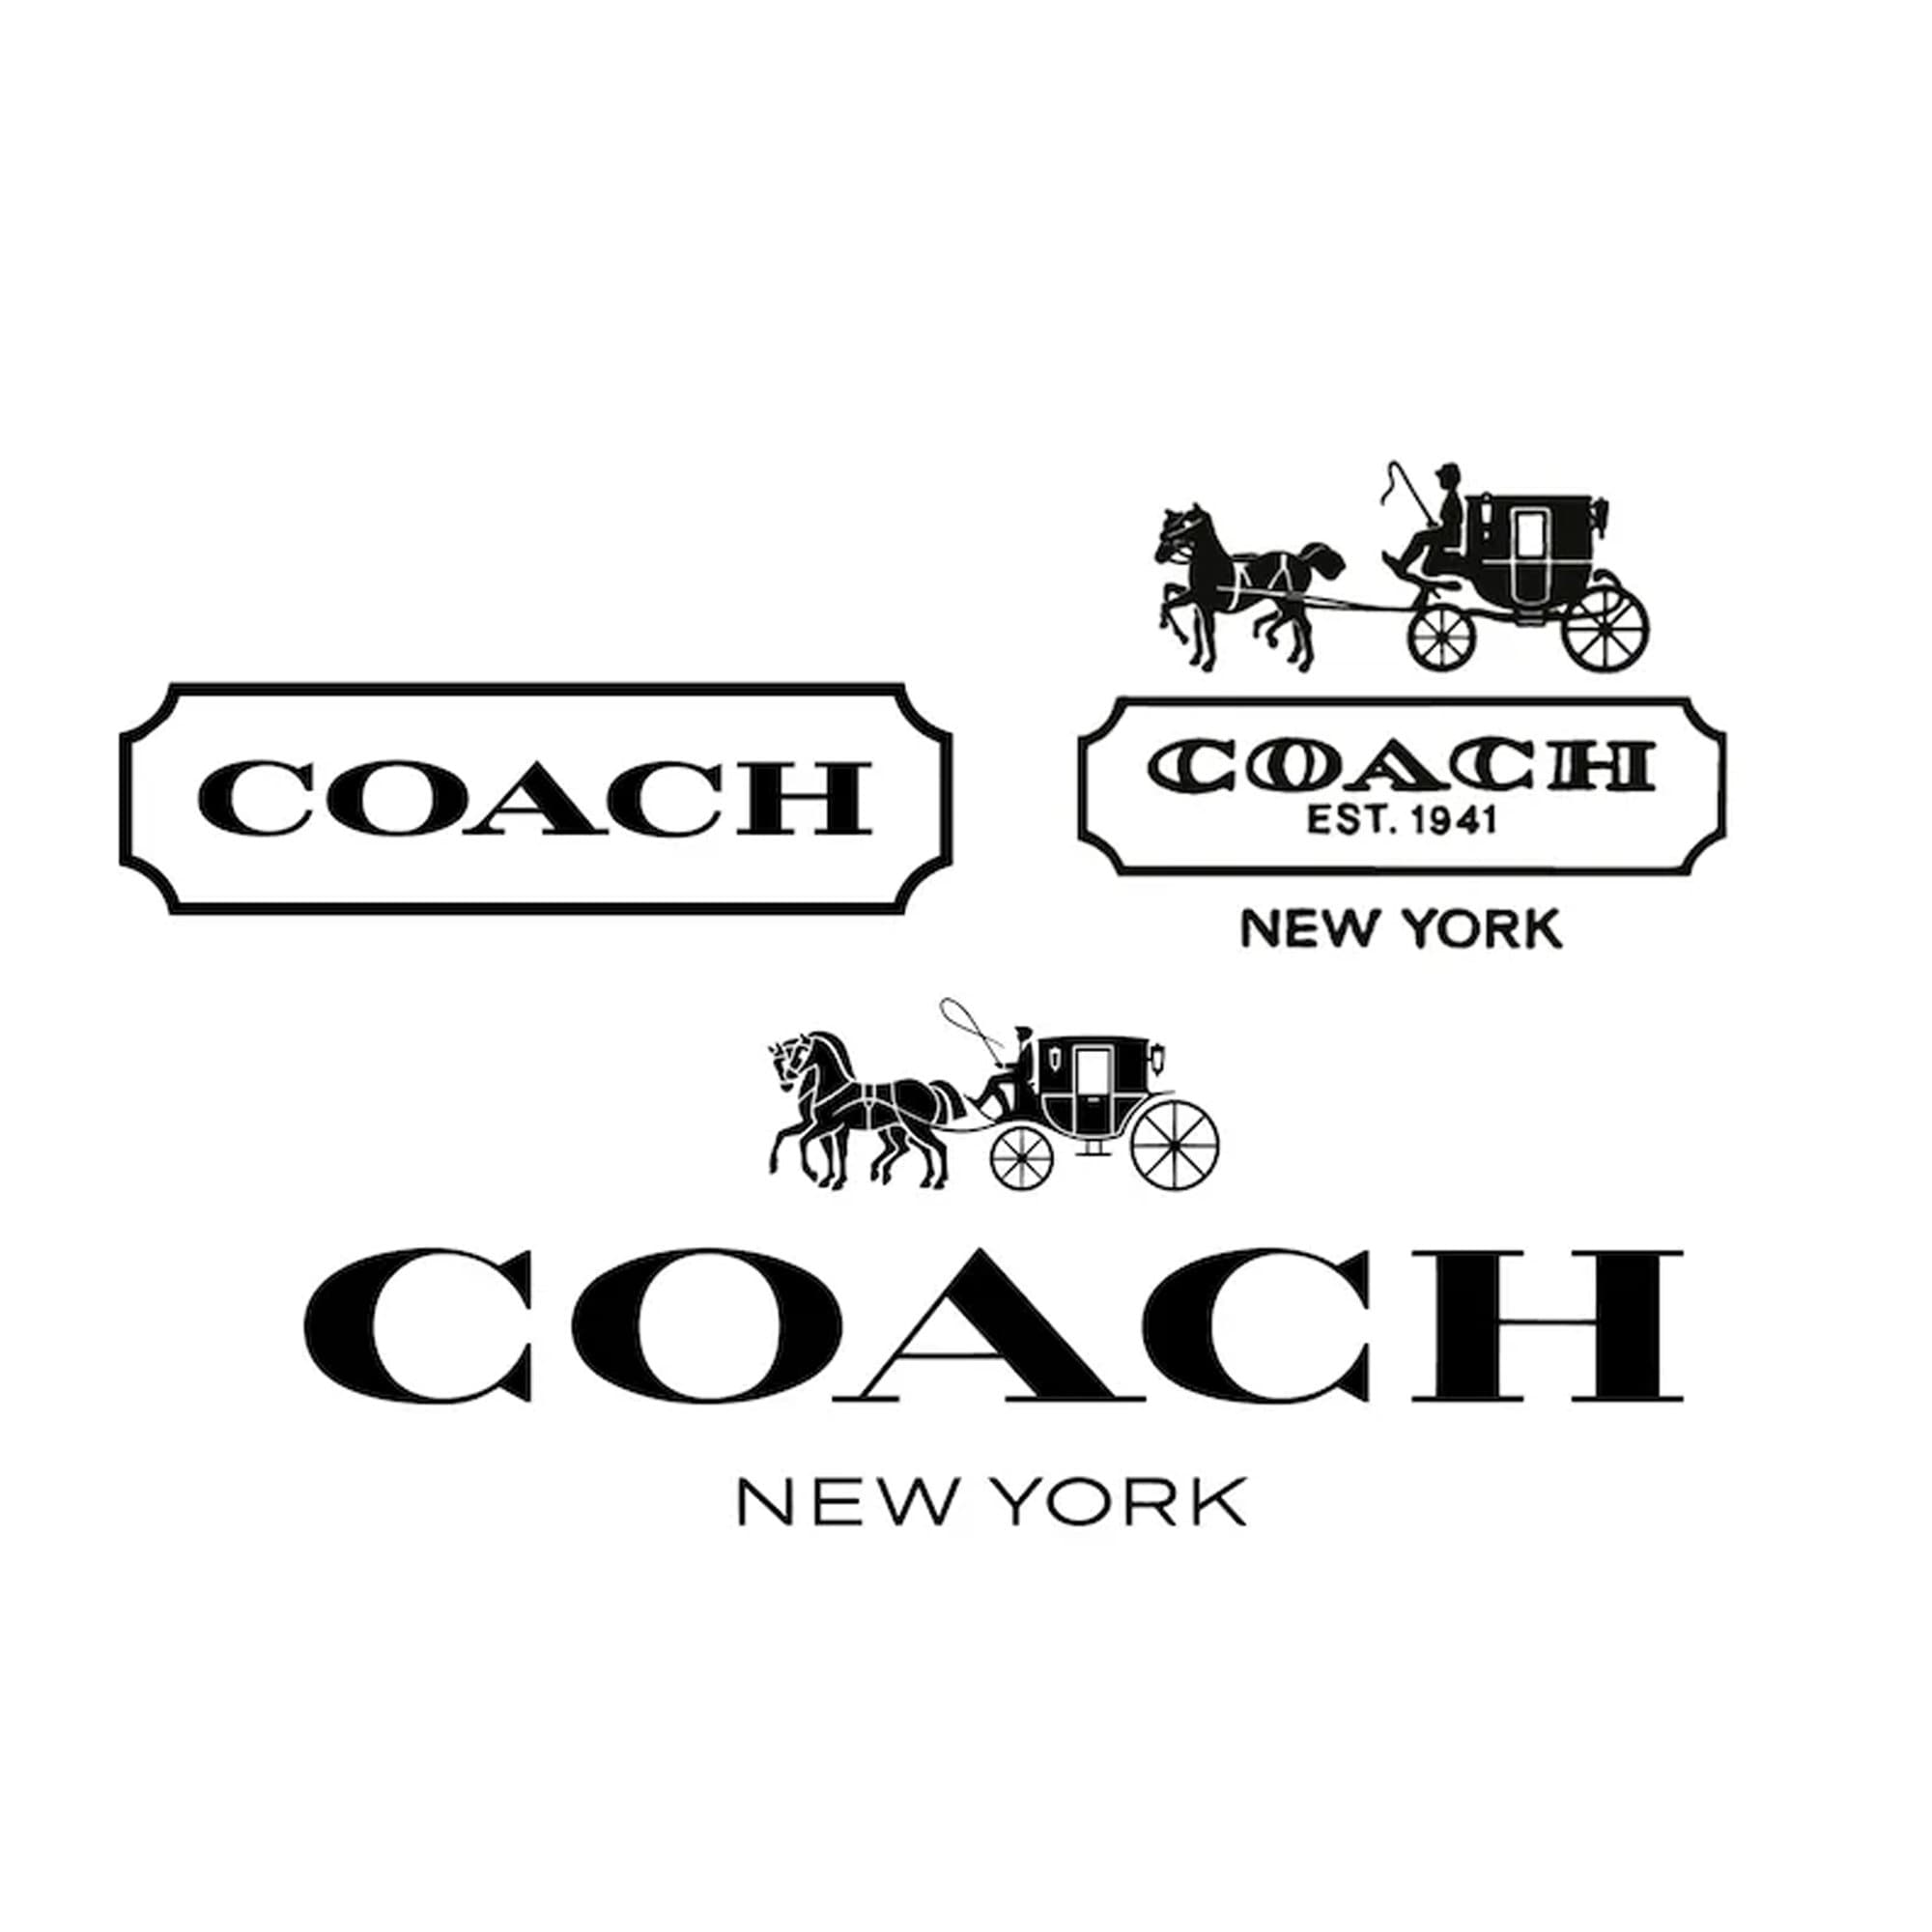 What if my coach bag doesn't have a serial number? - Quora